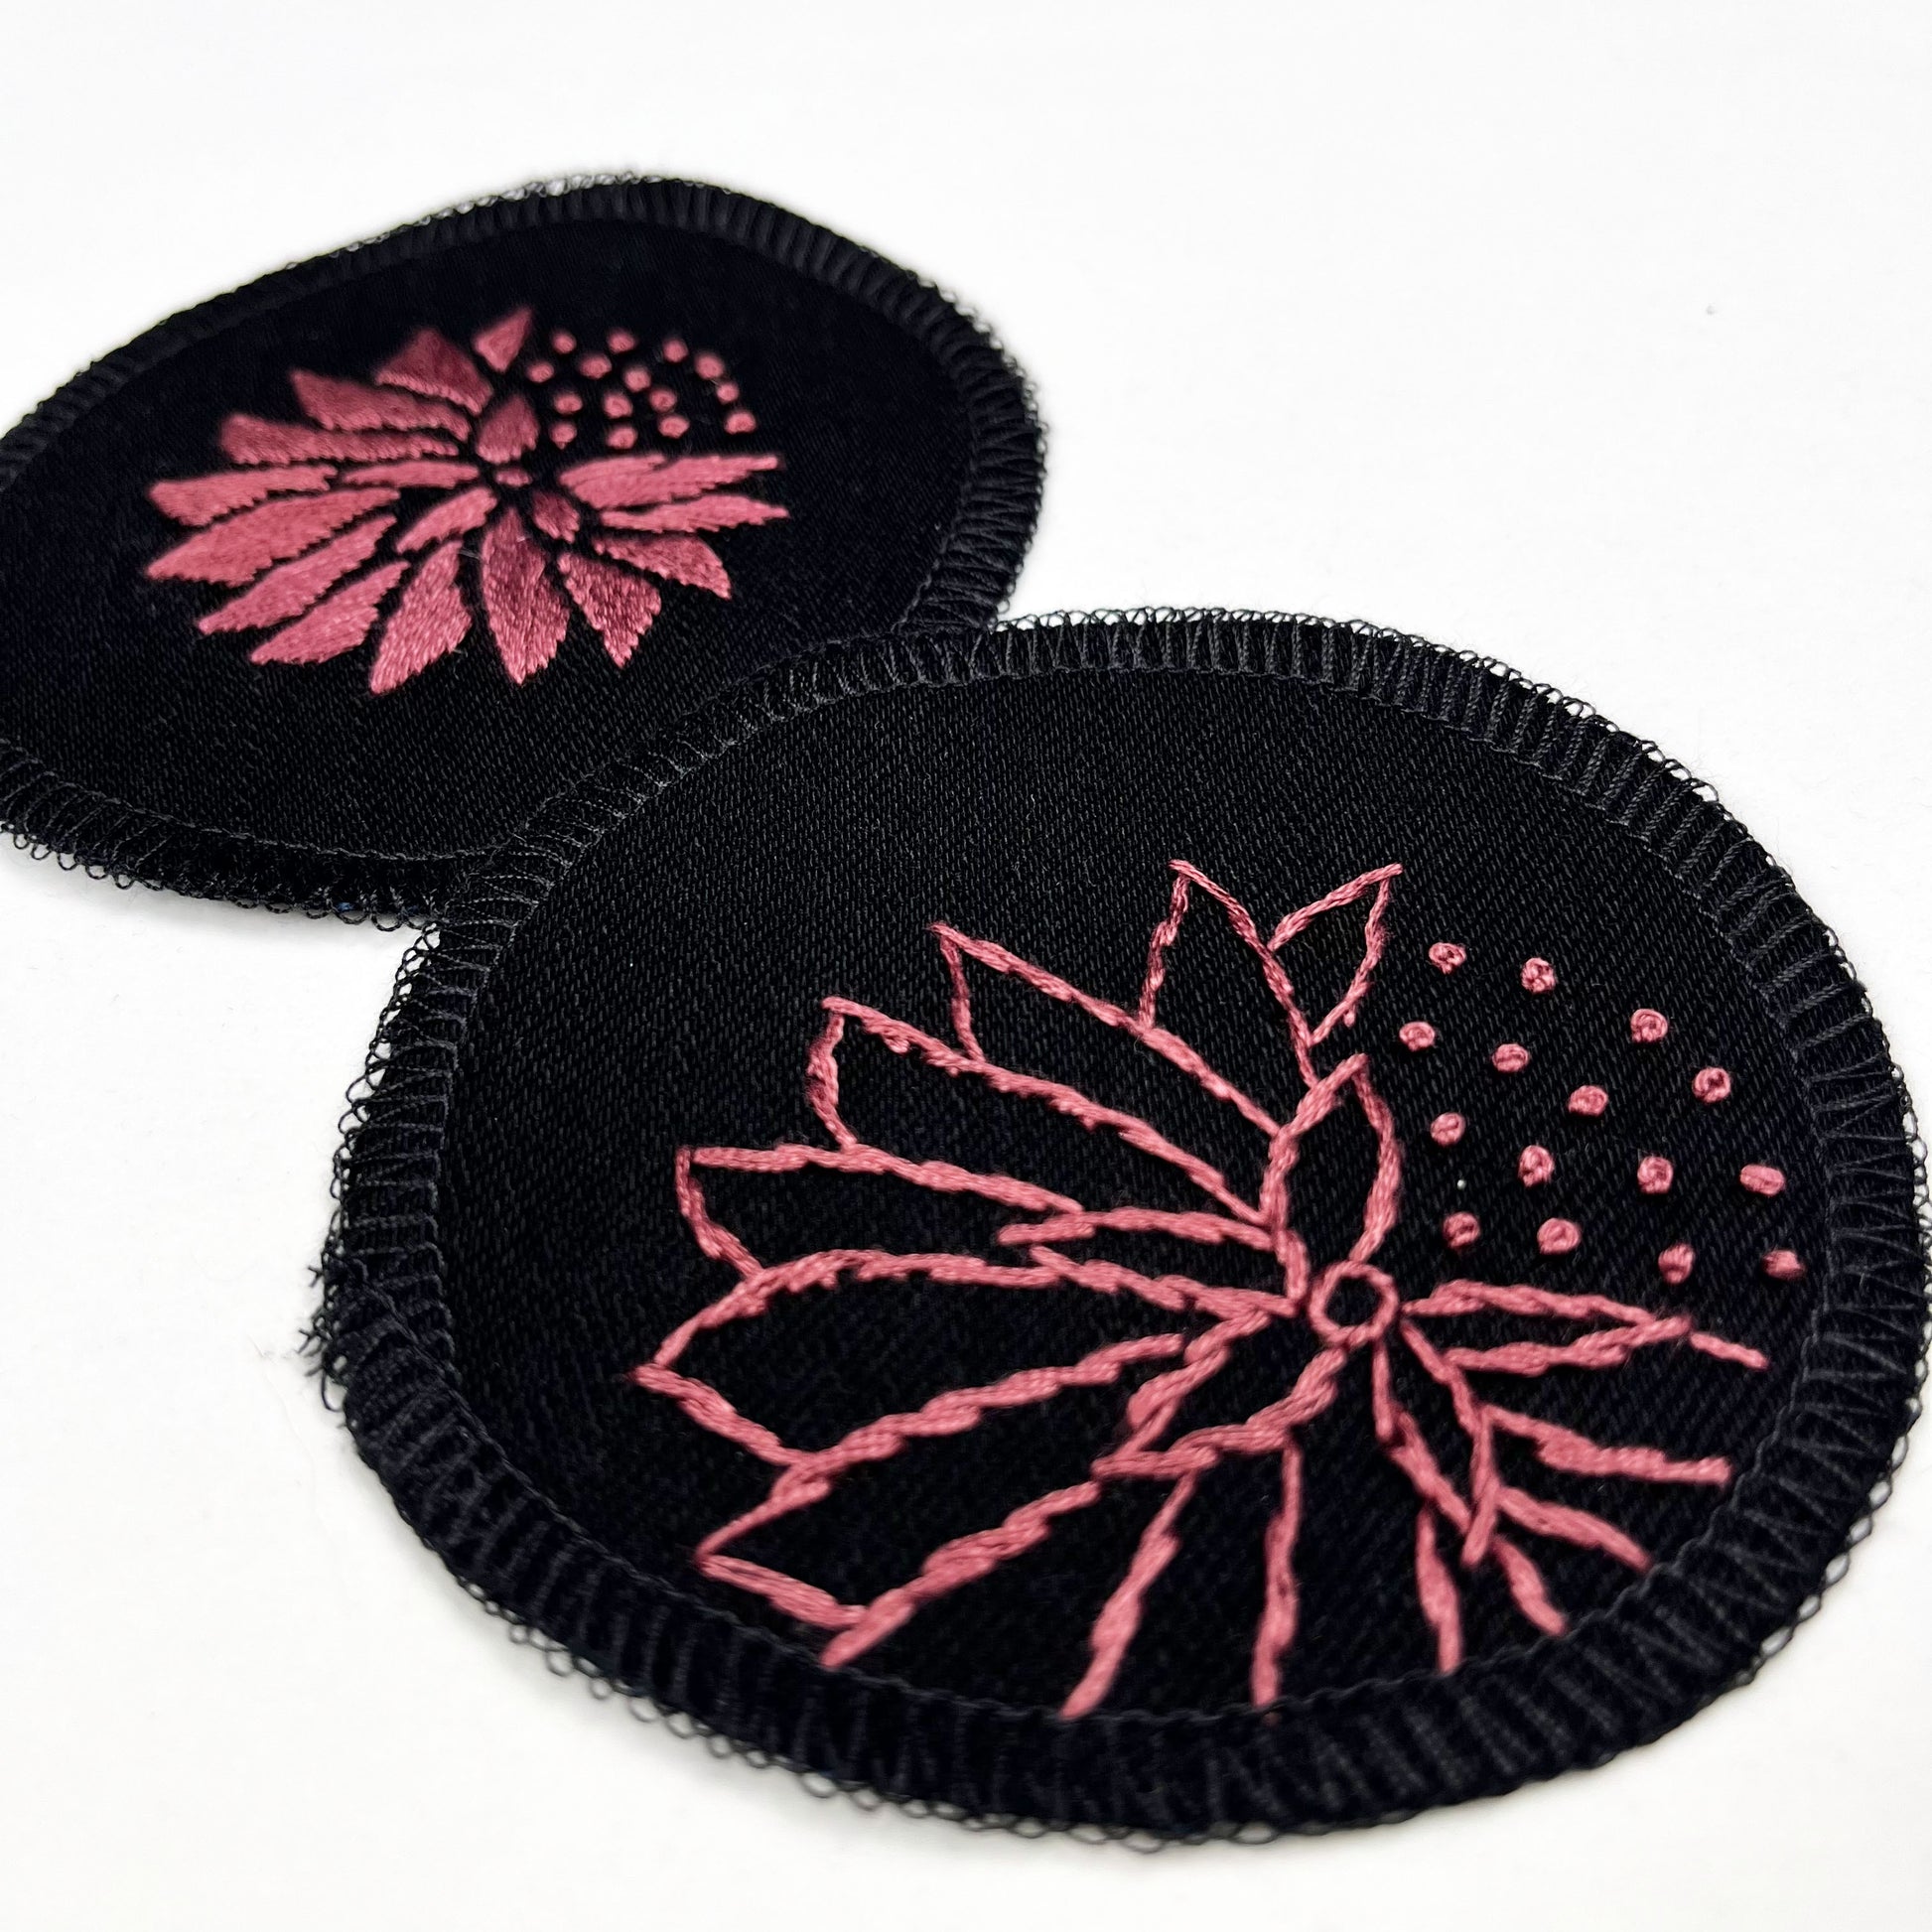 two circle shaped patches made out of black twill weave fabric, hand embroidered with abstract dandelions in plum colored floss, one with solid filled petals, the other with outlines of petals, edges overlocked in black, on a white background